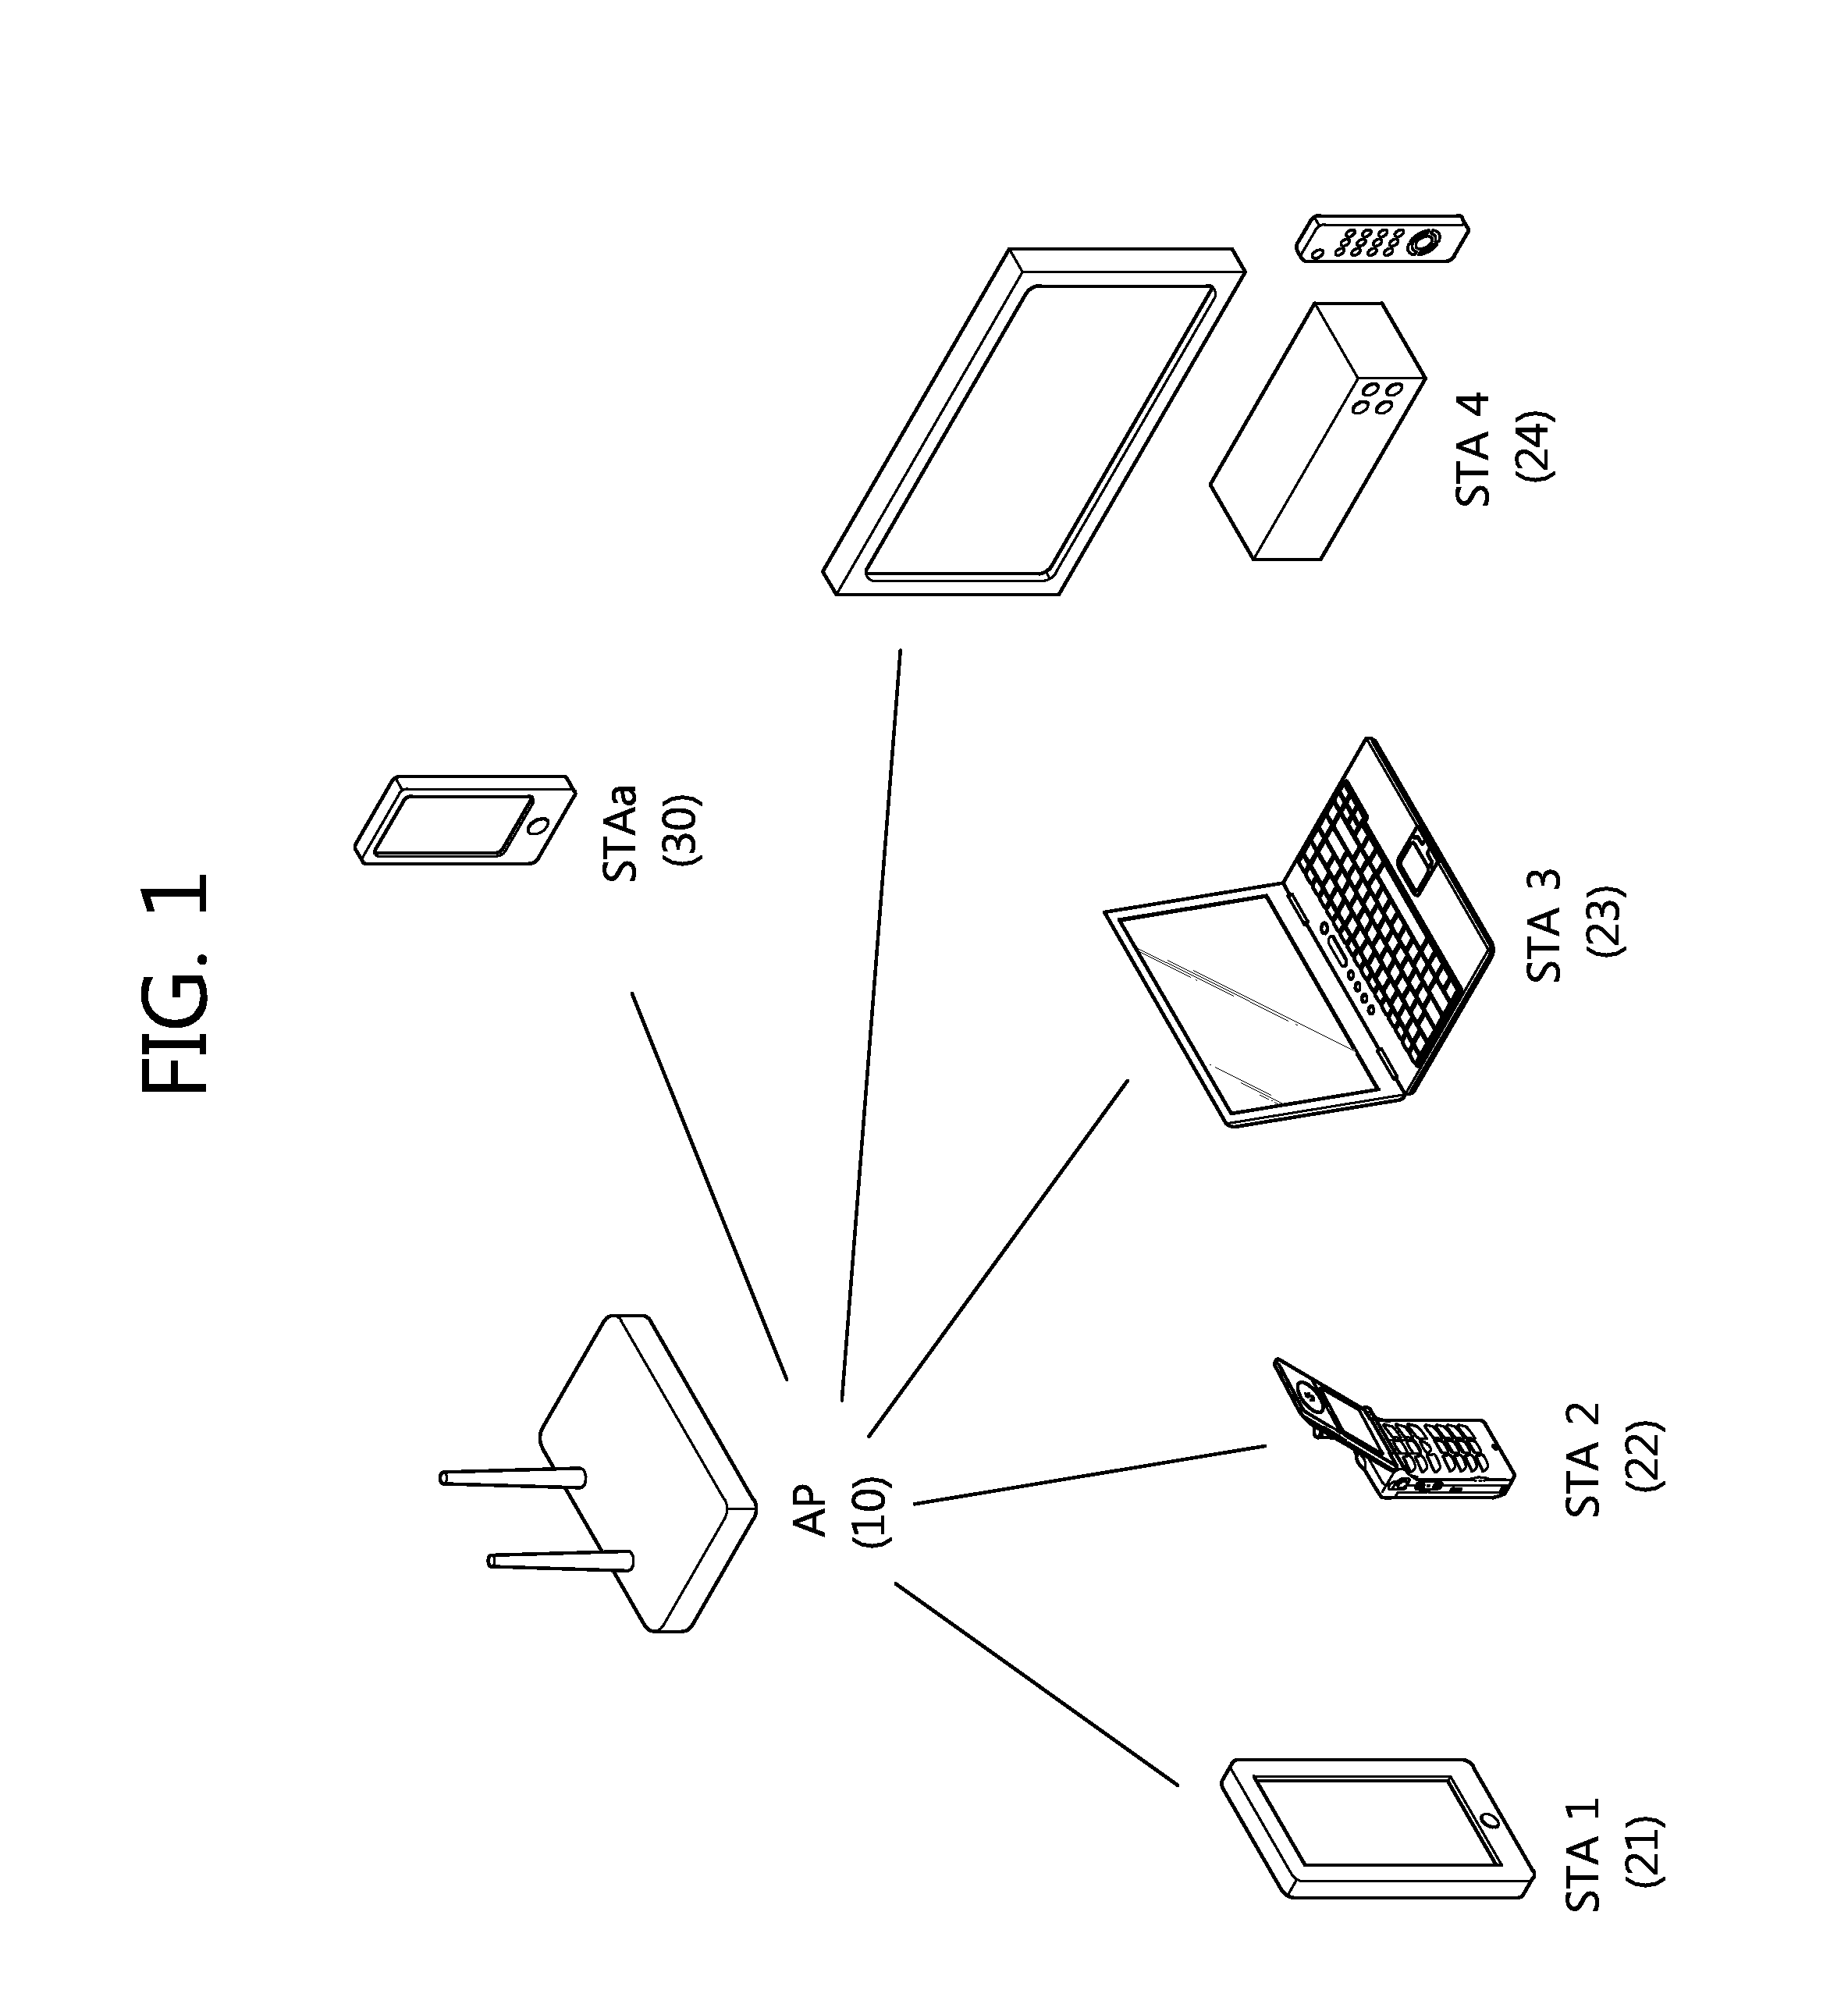 Method for transceiving data on basis of service period scheduling in wireless LAN system and apparatus for supporting same